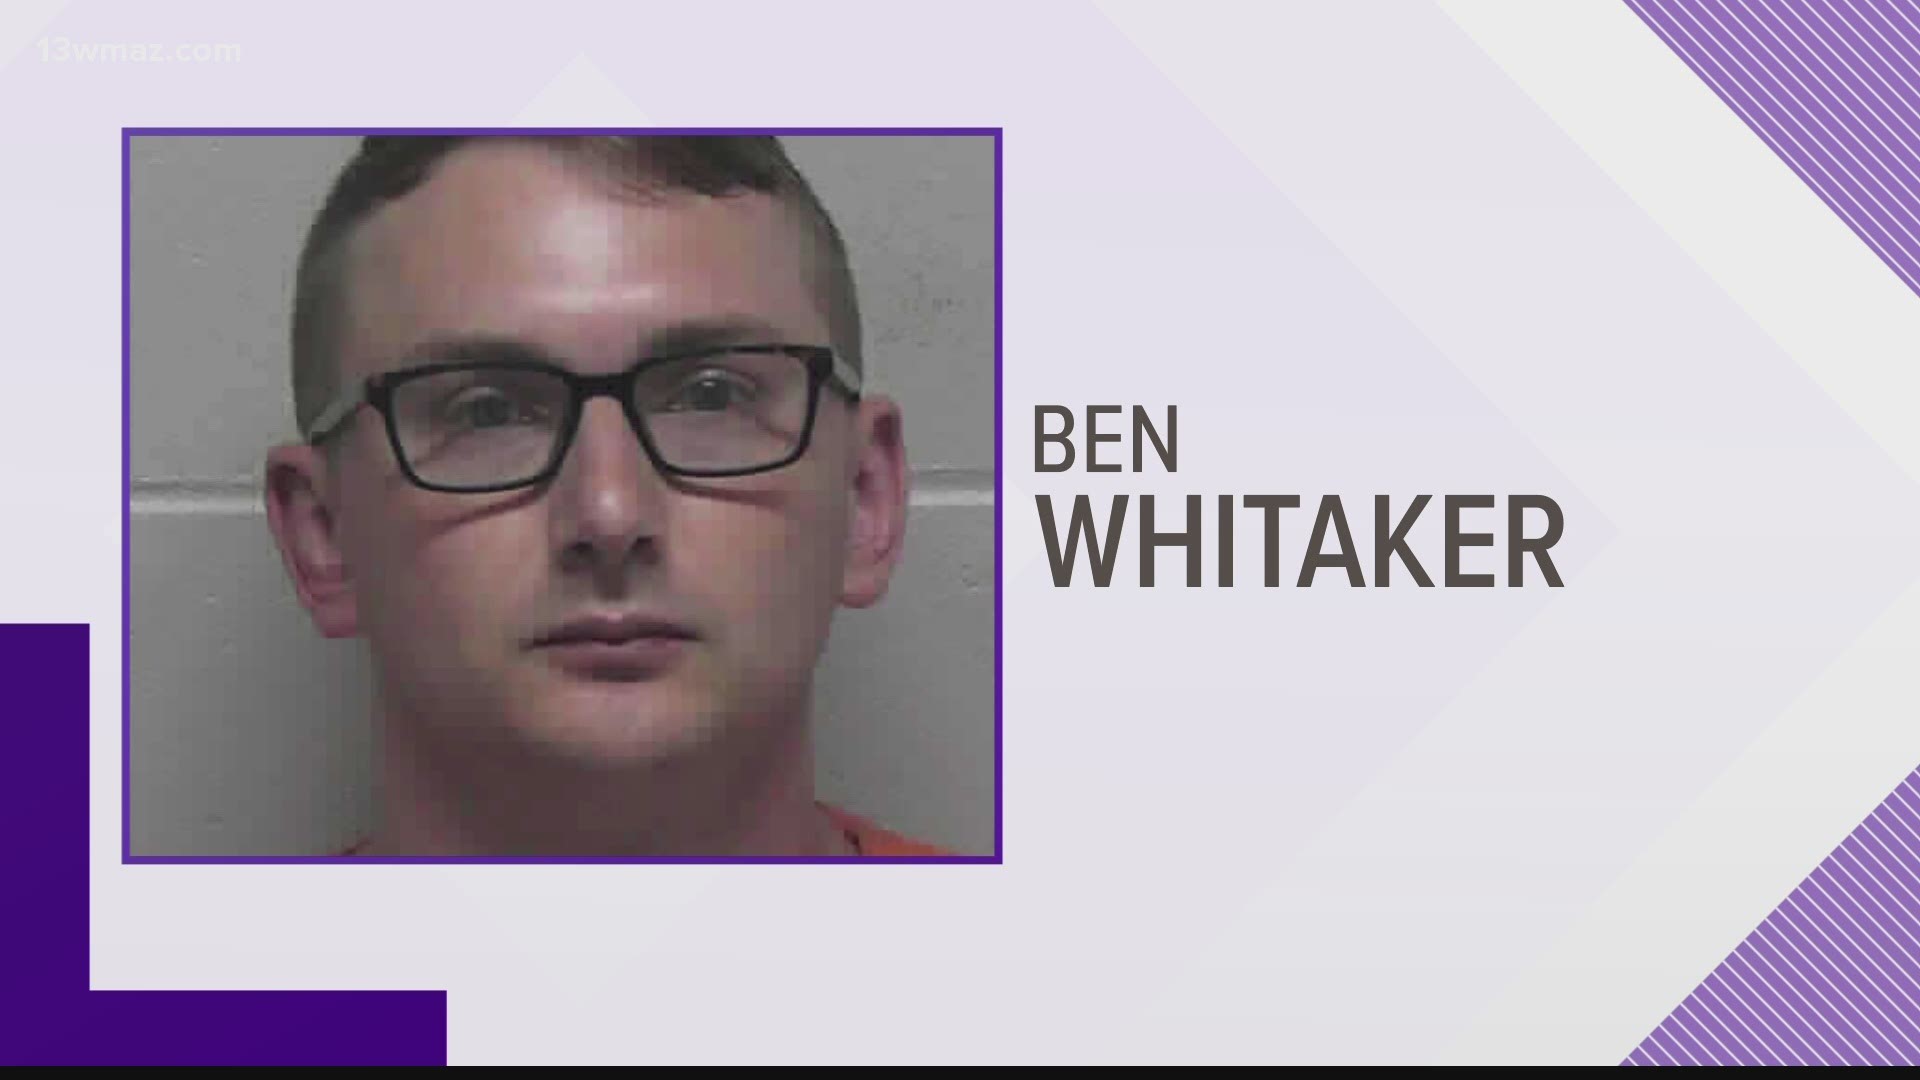 Ben Whitaker, a former RN at Fairview Park, is charged with murdering his newlywed wife, Tiffani